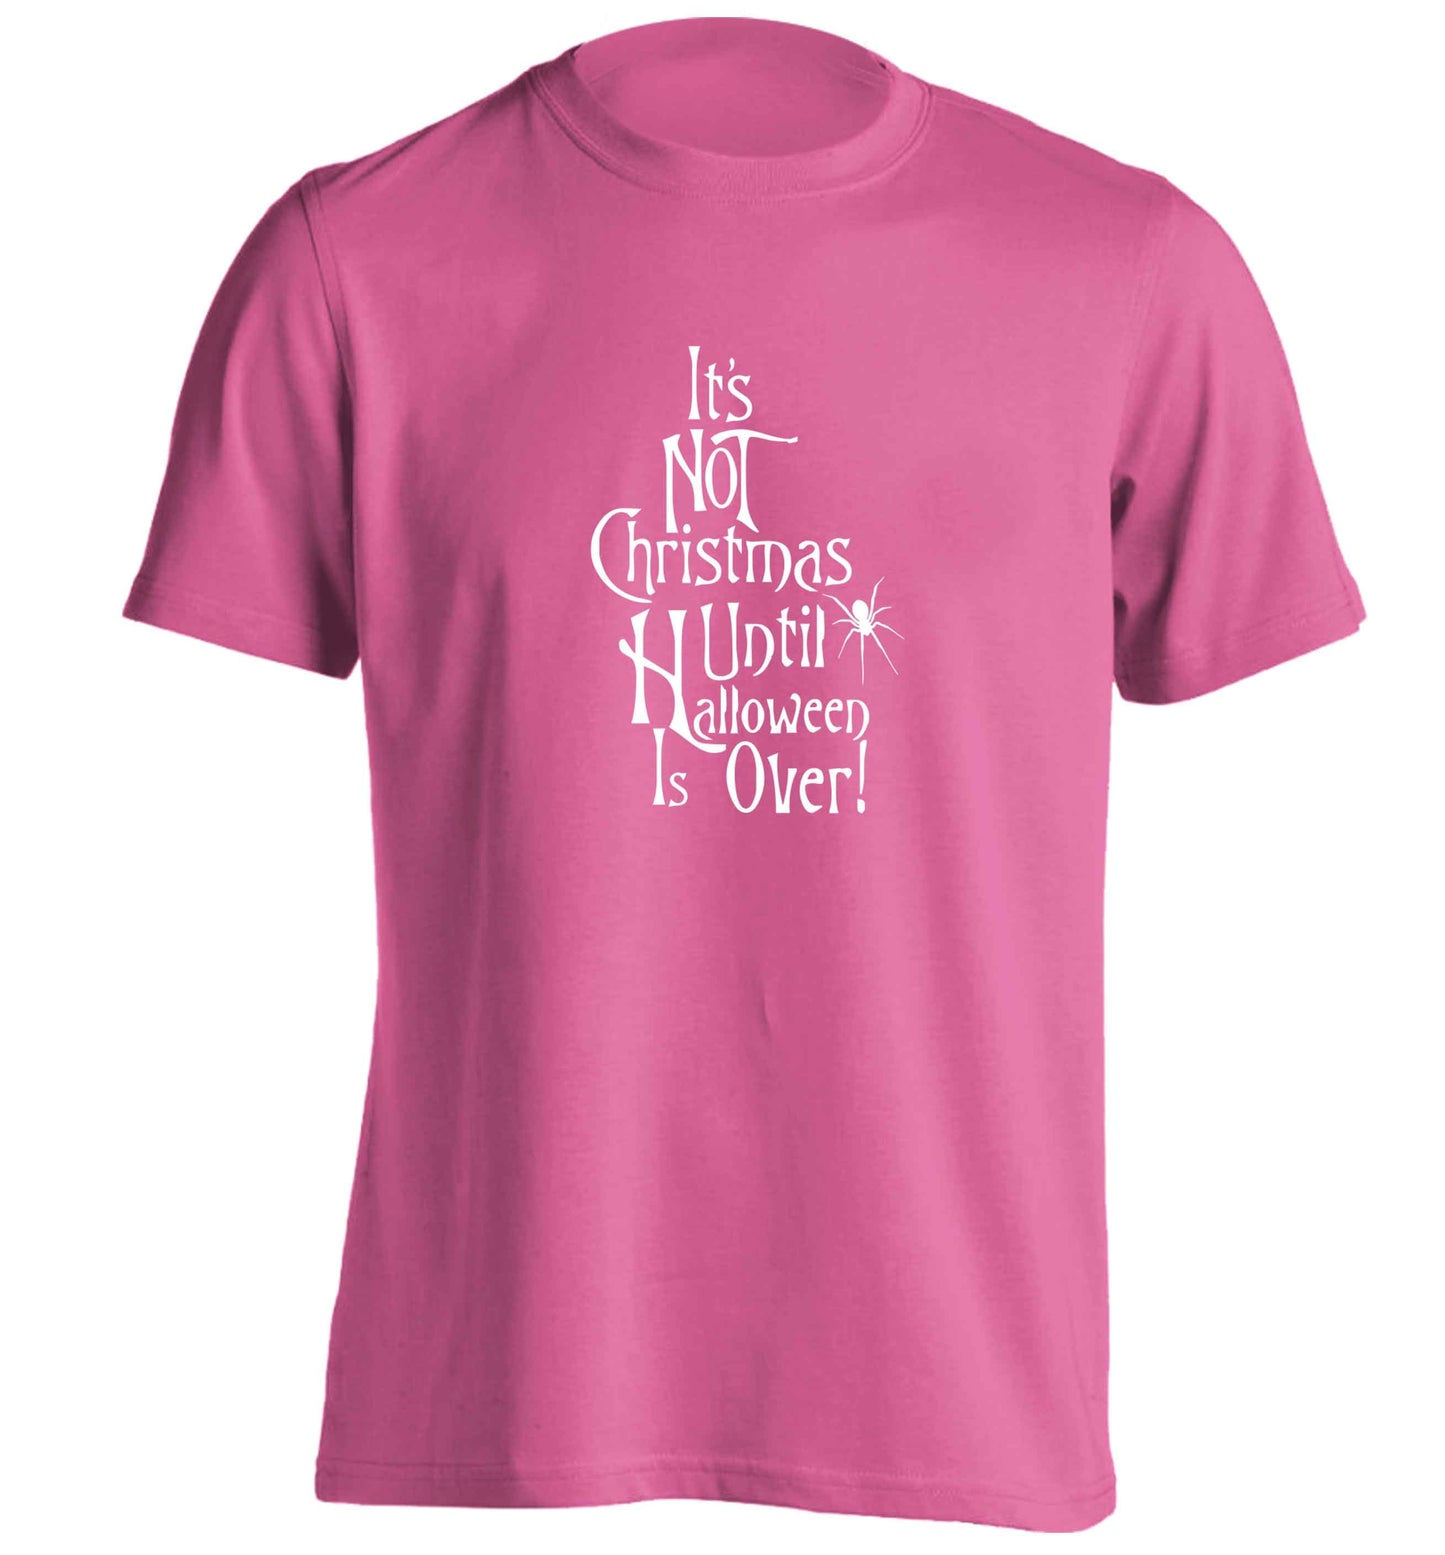 It's not Christmas until Halloween is over adults unisex pink Tshirt 2XL